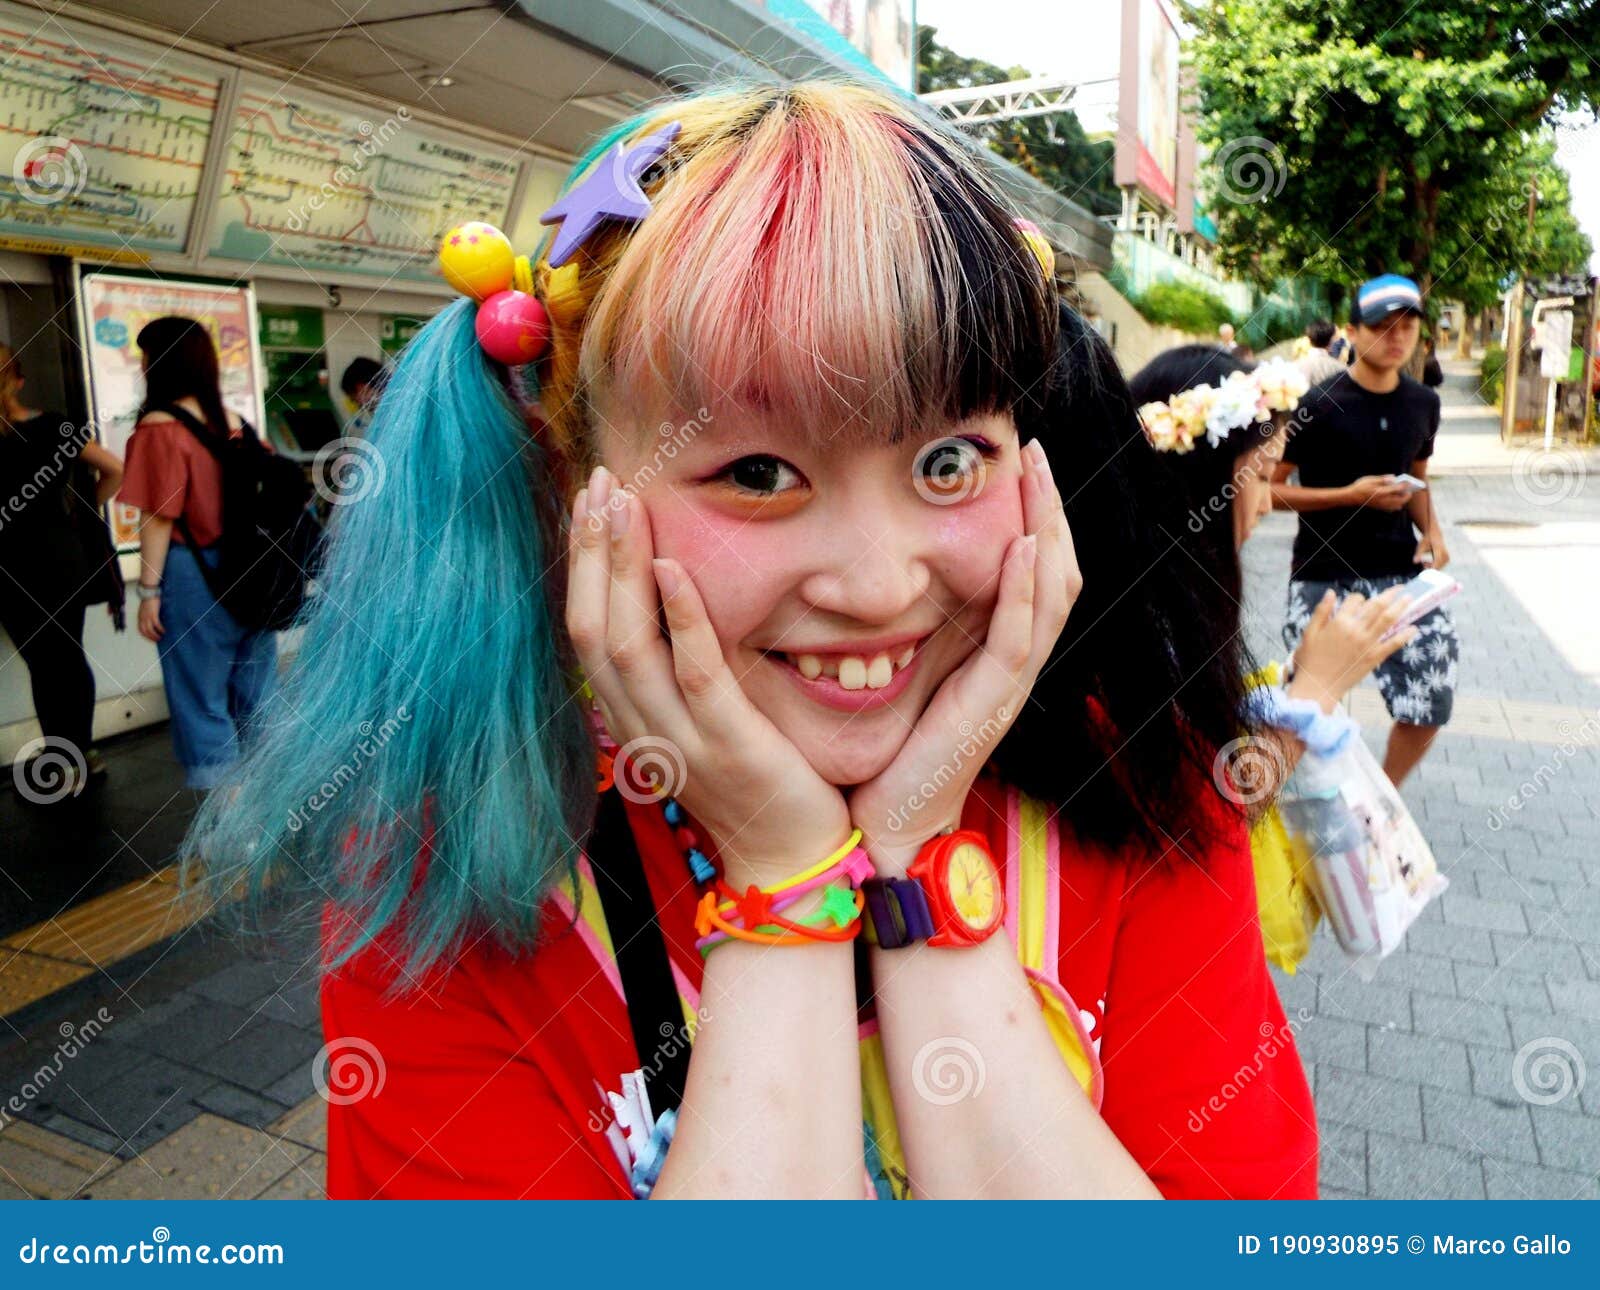 Tokyo, Japan, July 20, 2016: A Japanese girl poses on Takeshita Street in the Harajuku district. This street is famous for anime and manga clothing and accessories stores